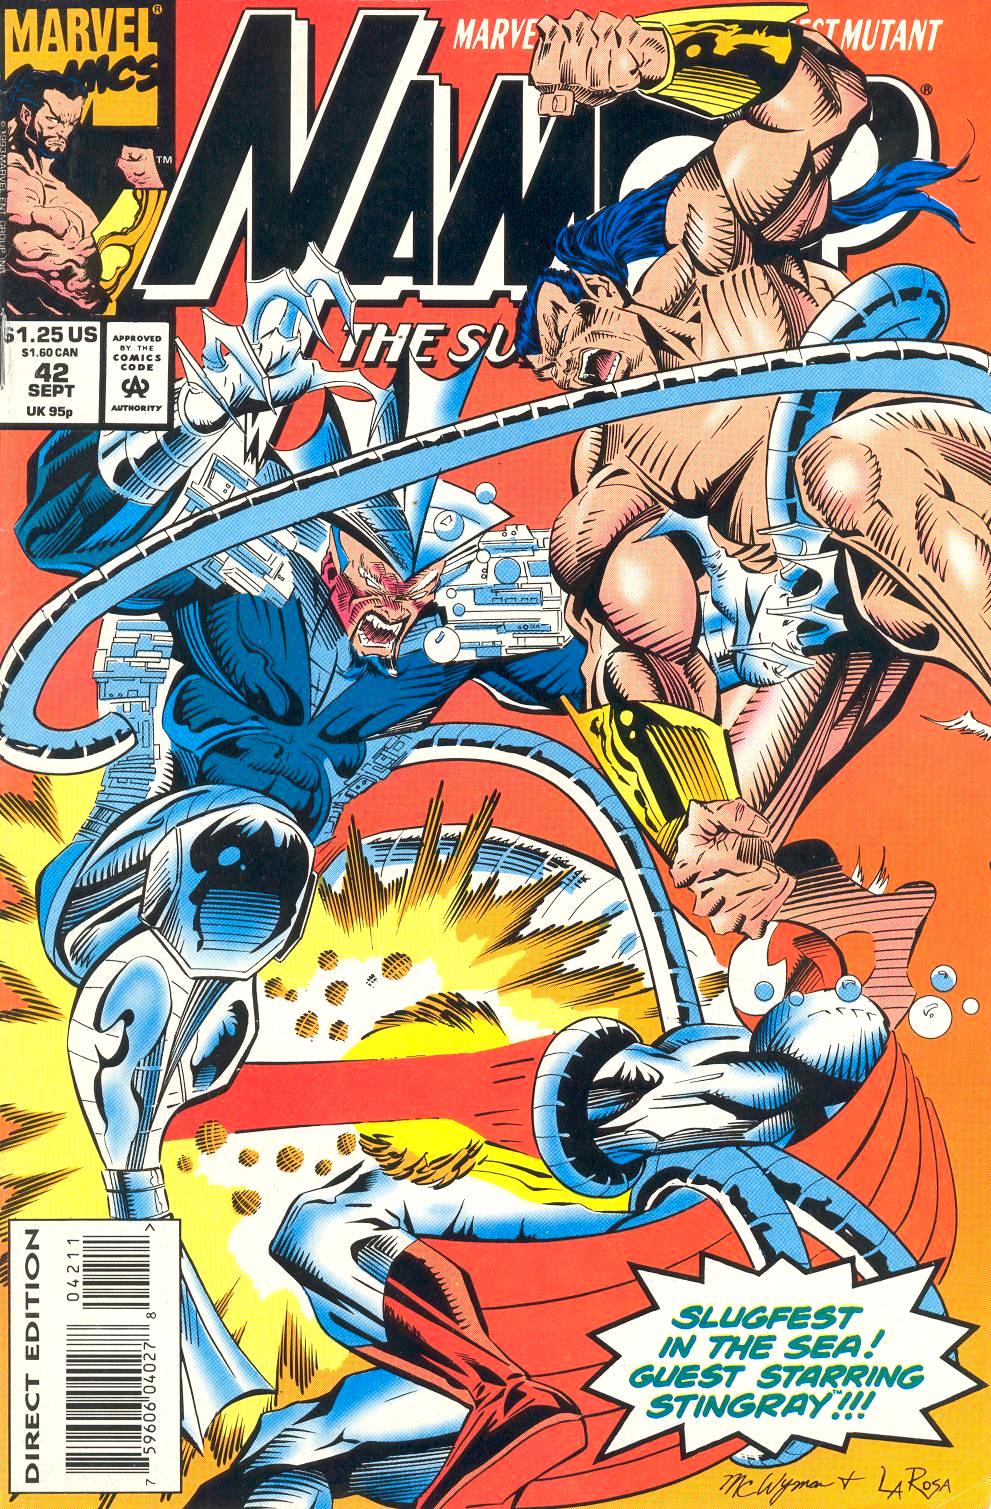 Read online Namor, The Sub-Mariner comic -  Issue #42 - 1